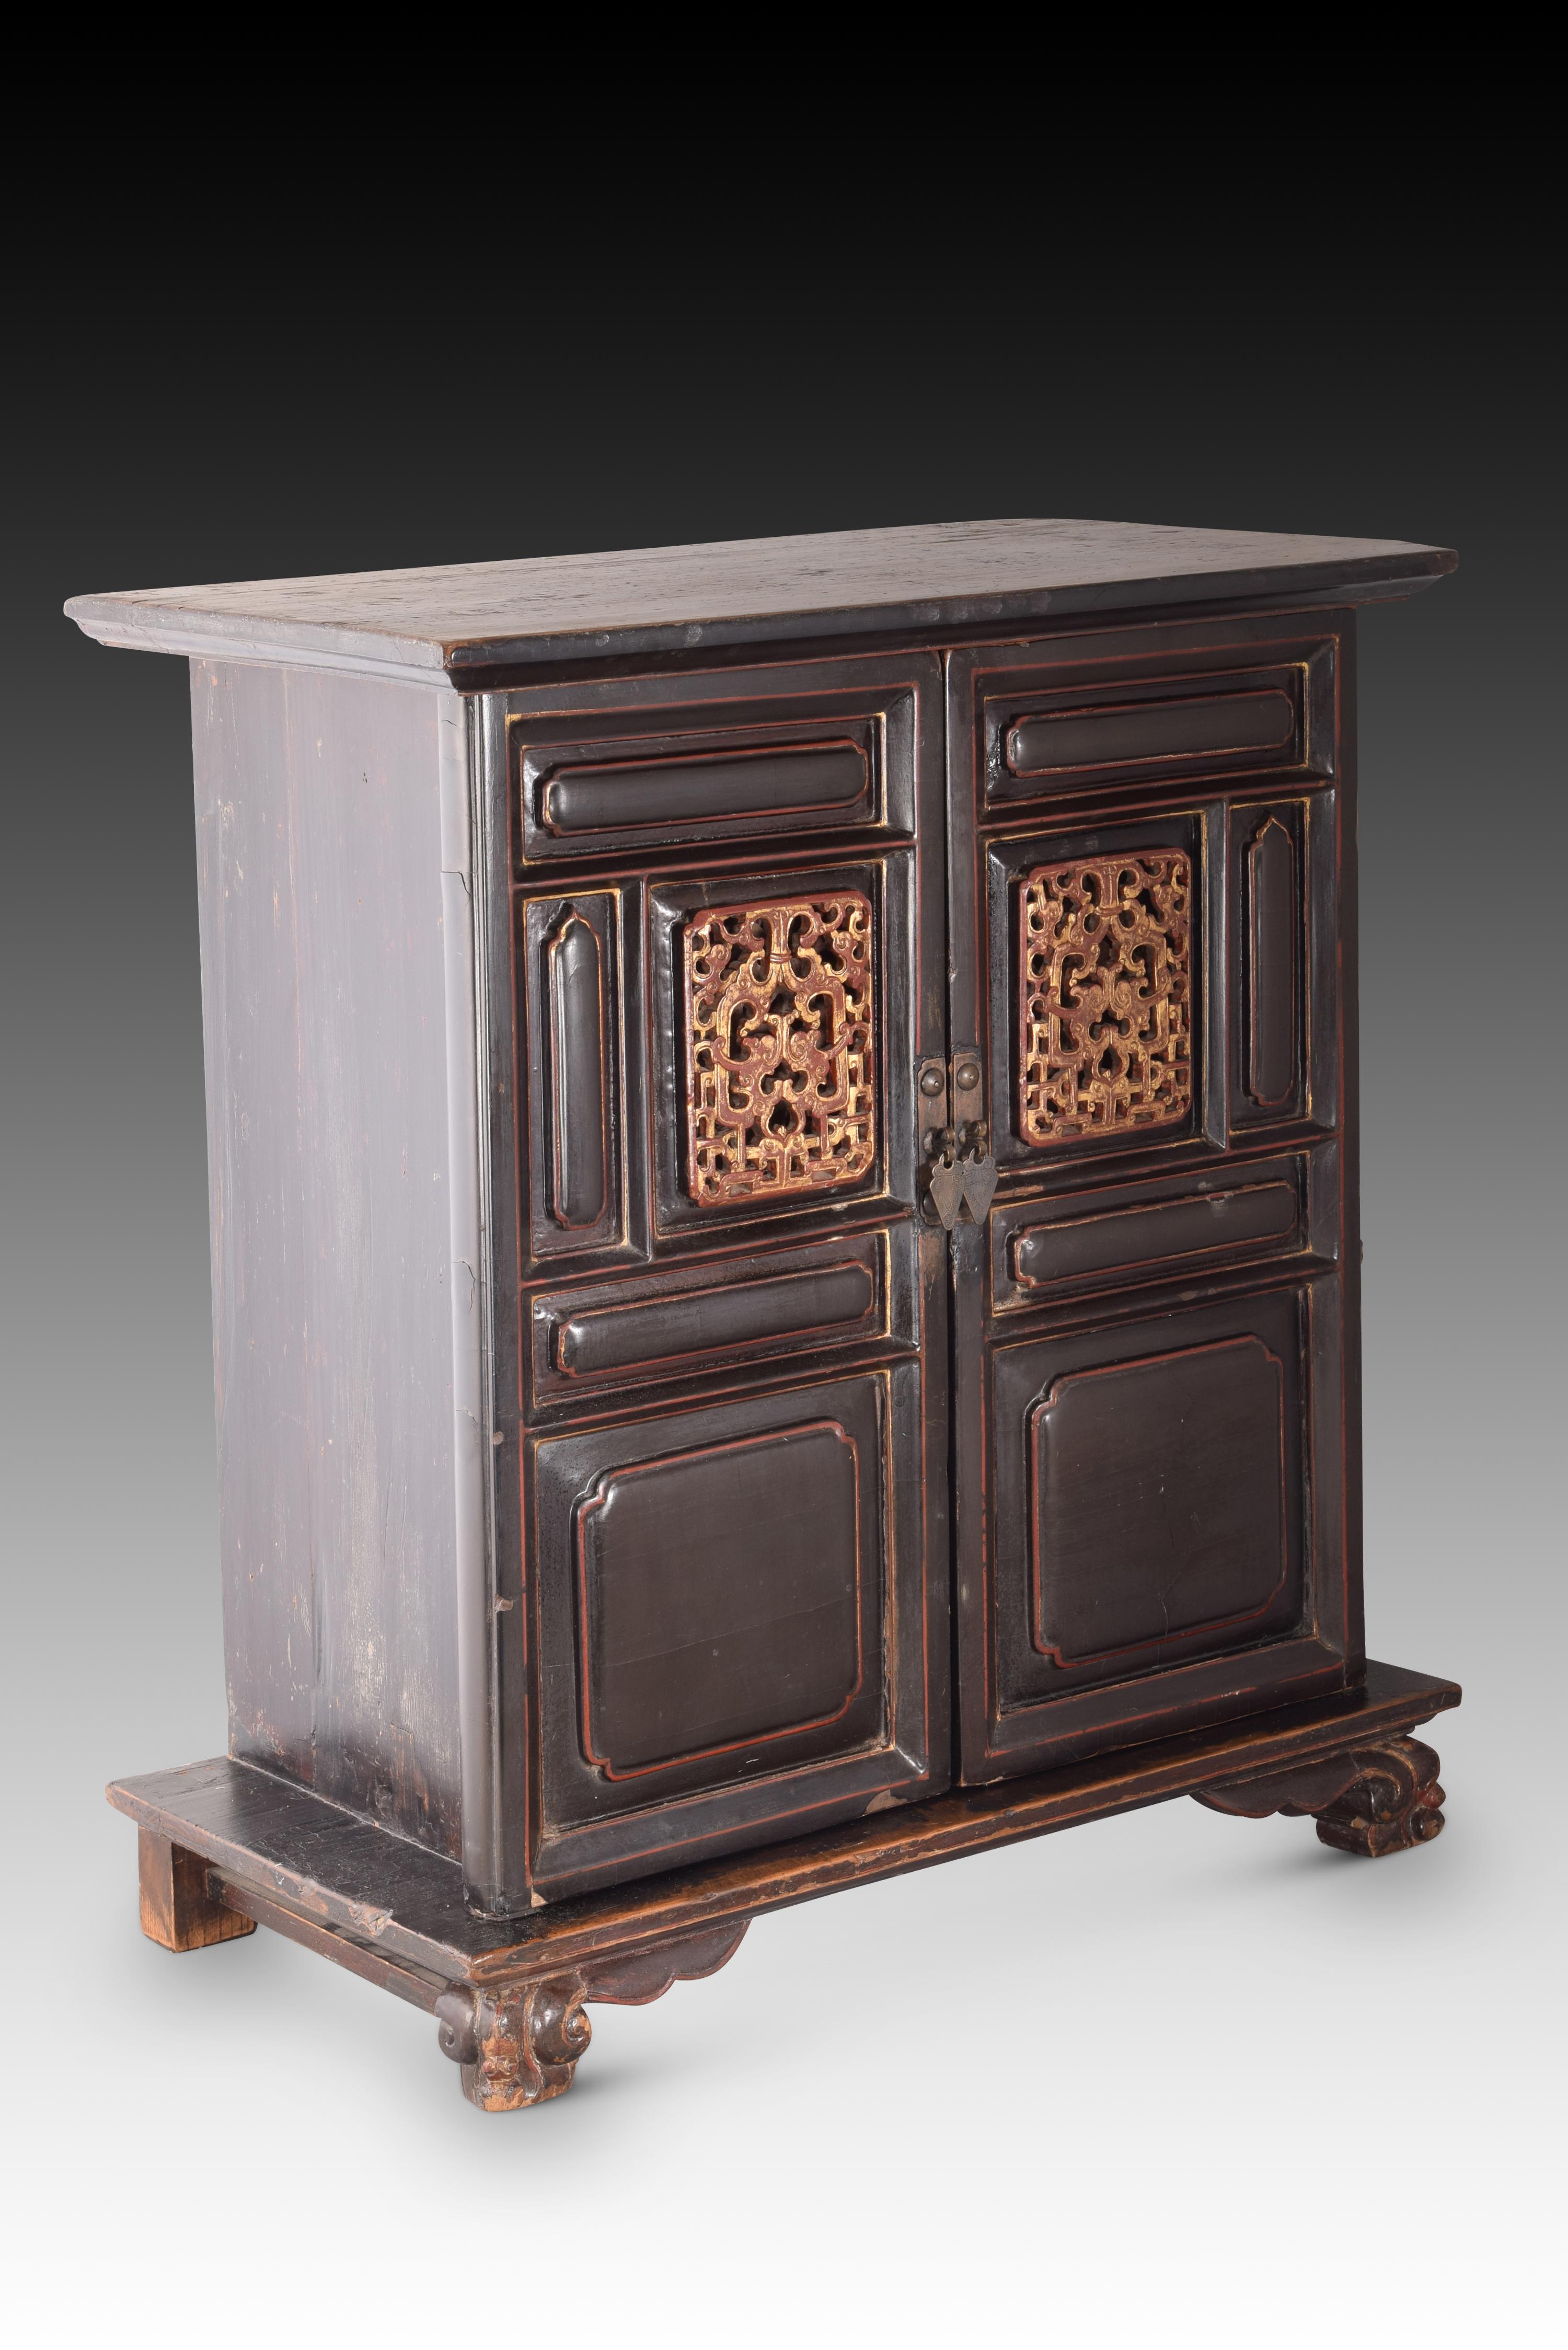 Eastern box office. Carved wood, metal. XIX century. 
Wooden block on legs (the front ones are carved) that has two doors at the front with metal handles and a decoration based on panels combined with two panels of simple openwork geometric motifs